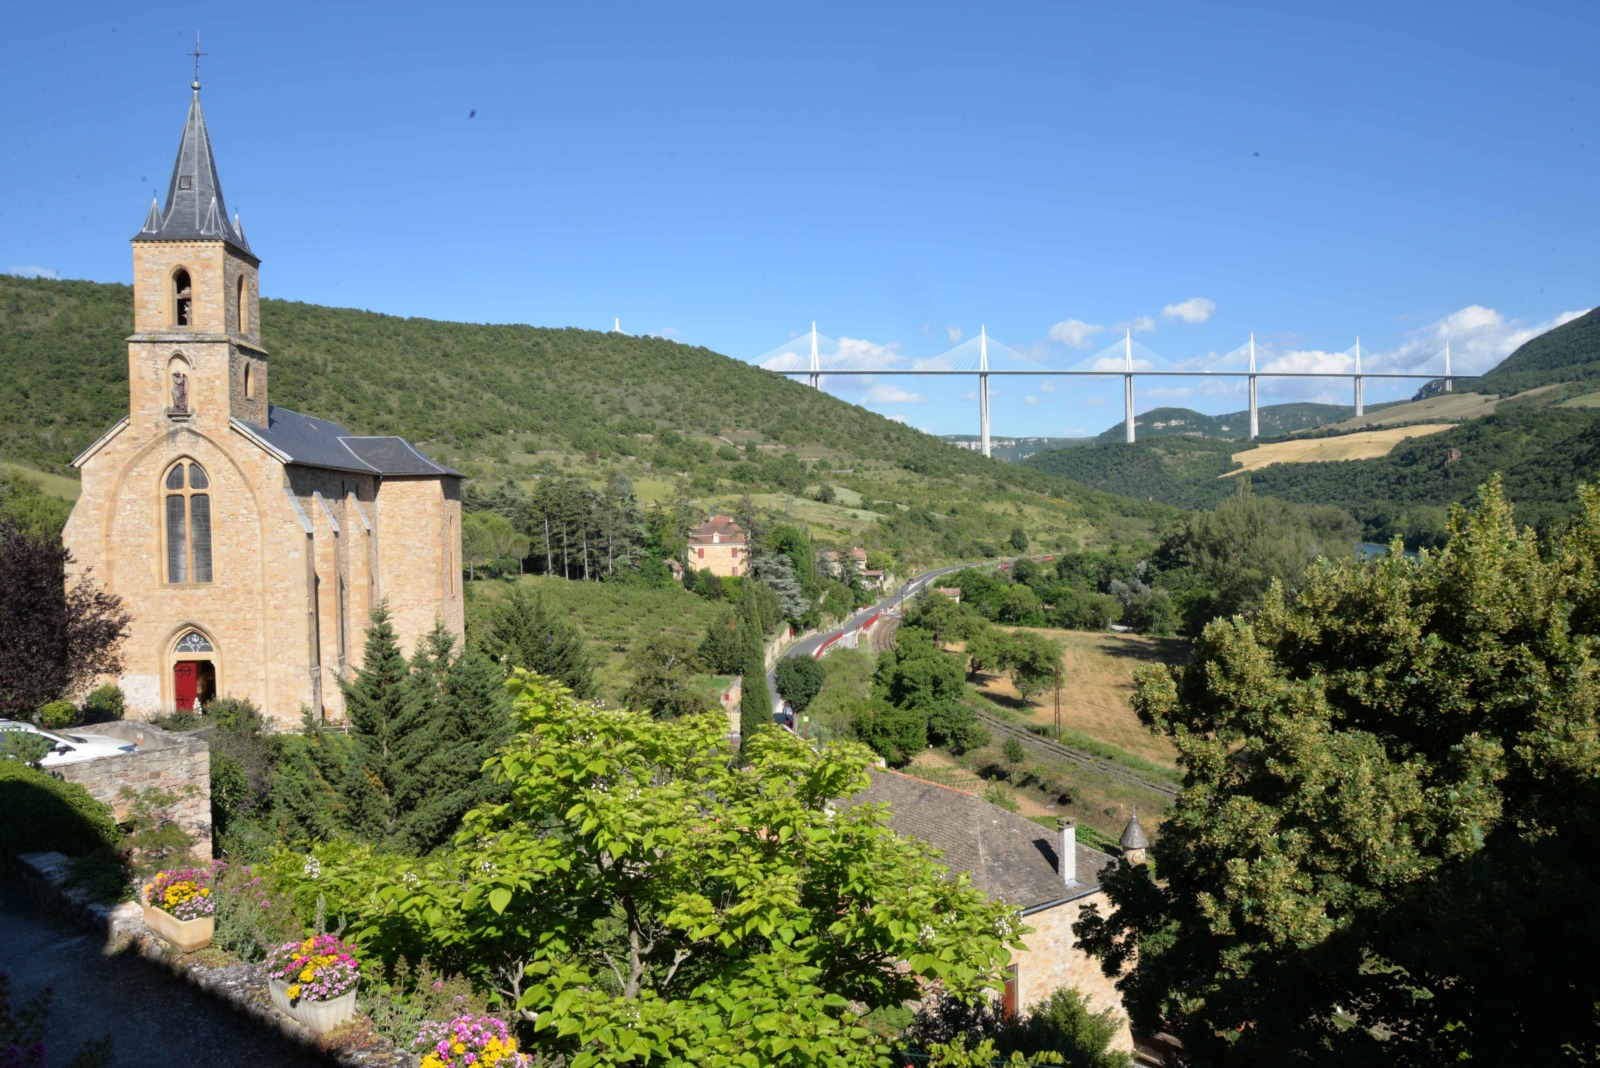 Peyre and Millau Viaduct © Calips - licence [CC BY-SA 3.0] from Wikimedia Commons